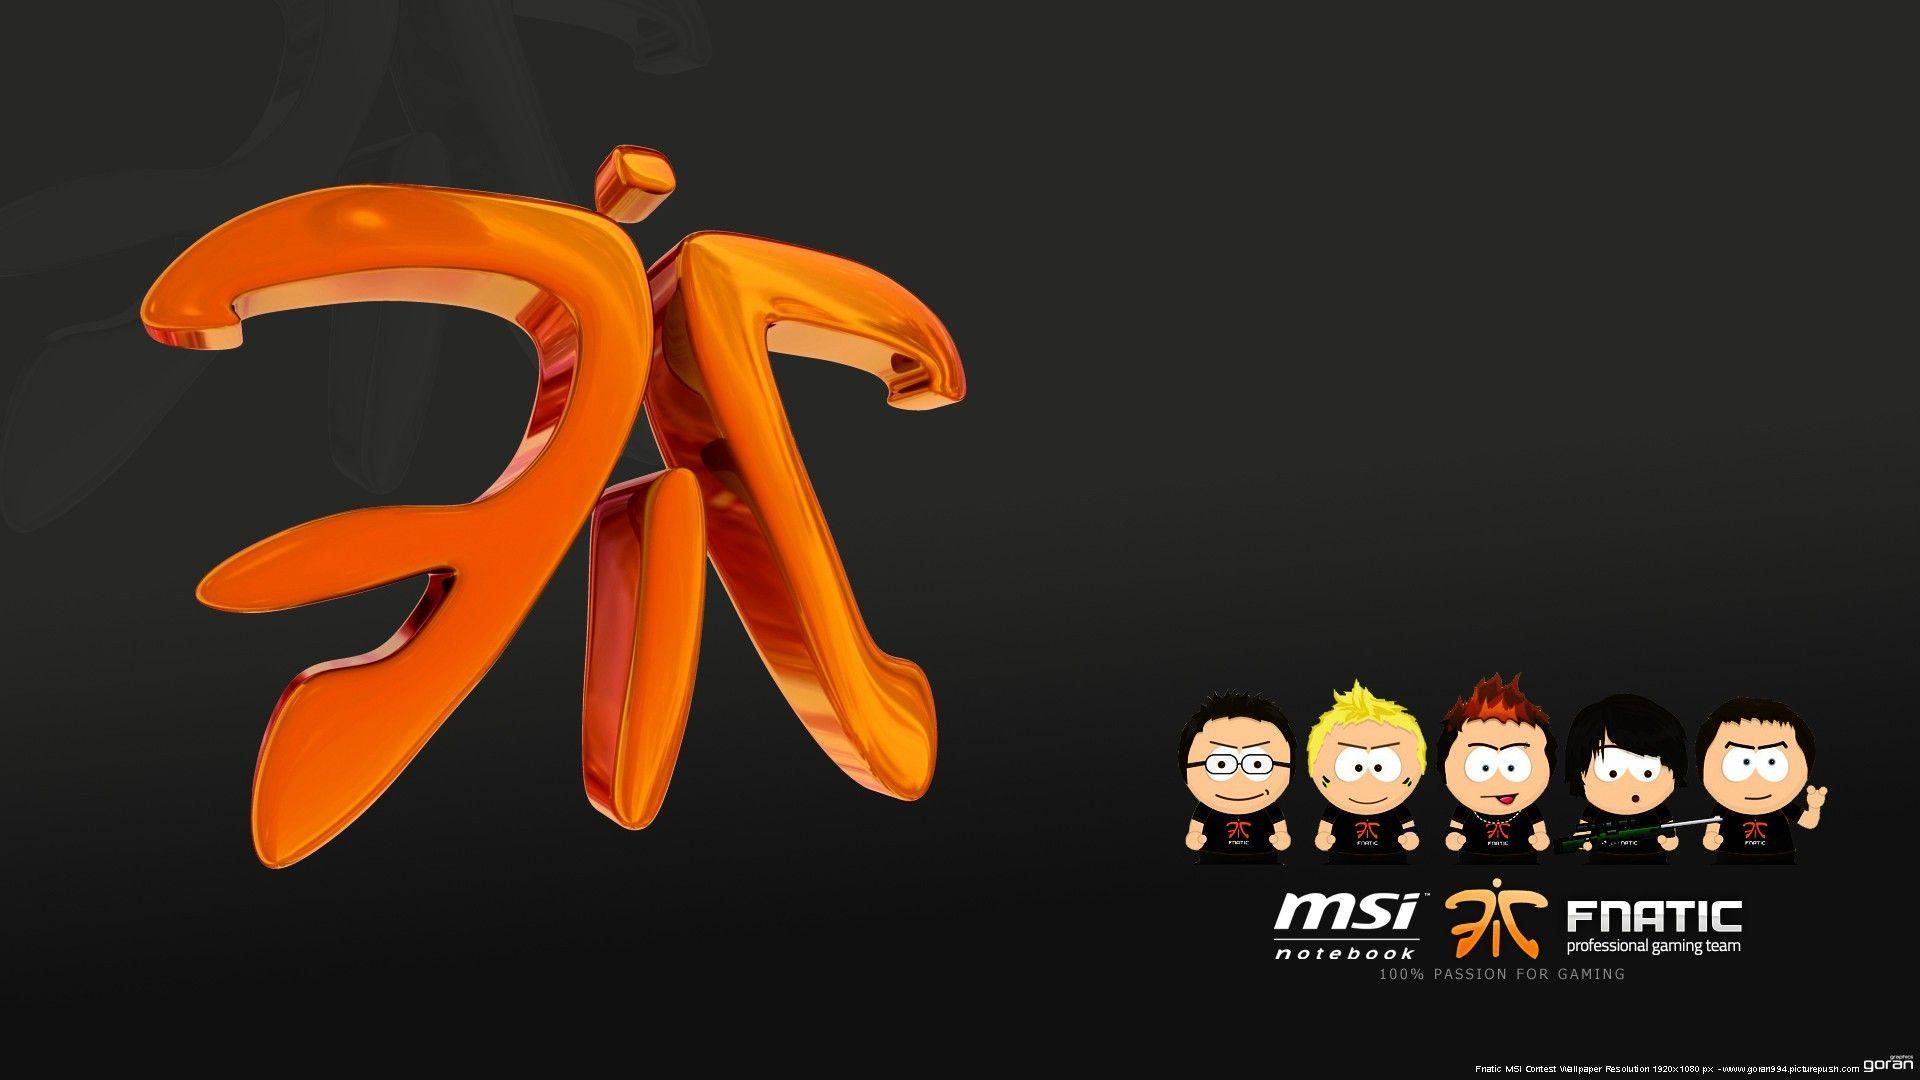 FNATIC.com: Winners of MSI Wallpaper Competition